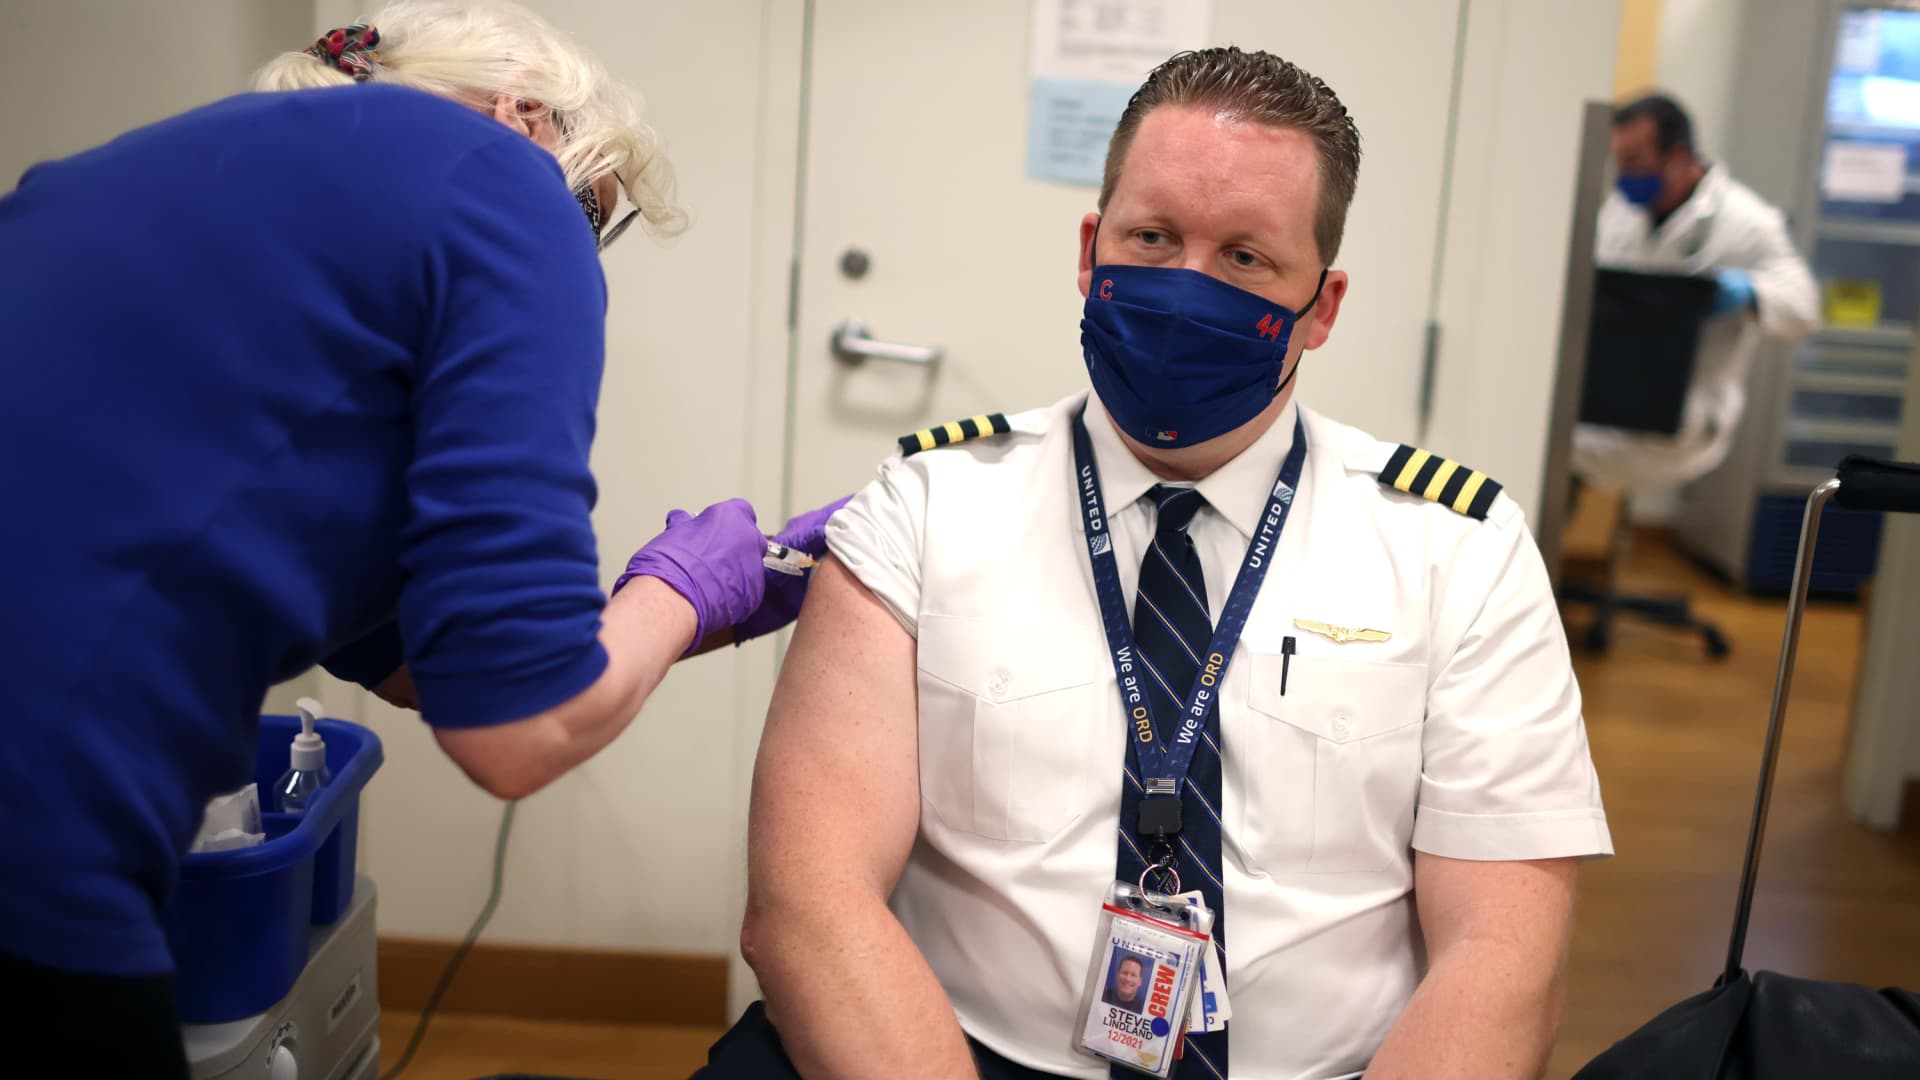 United Airlines pilot Steve Lindland receives a COVID-19 vaccine from RN Sandra Manella at United's onsite clinic at O'Hare International Airport on March 09, 2021 in Chicago, Illinois.